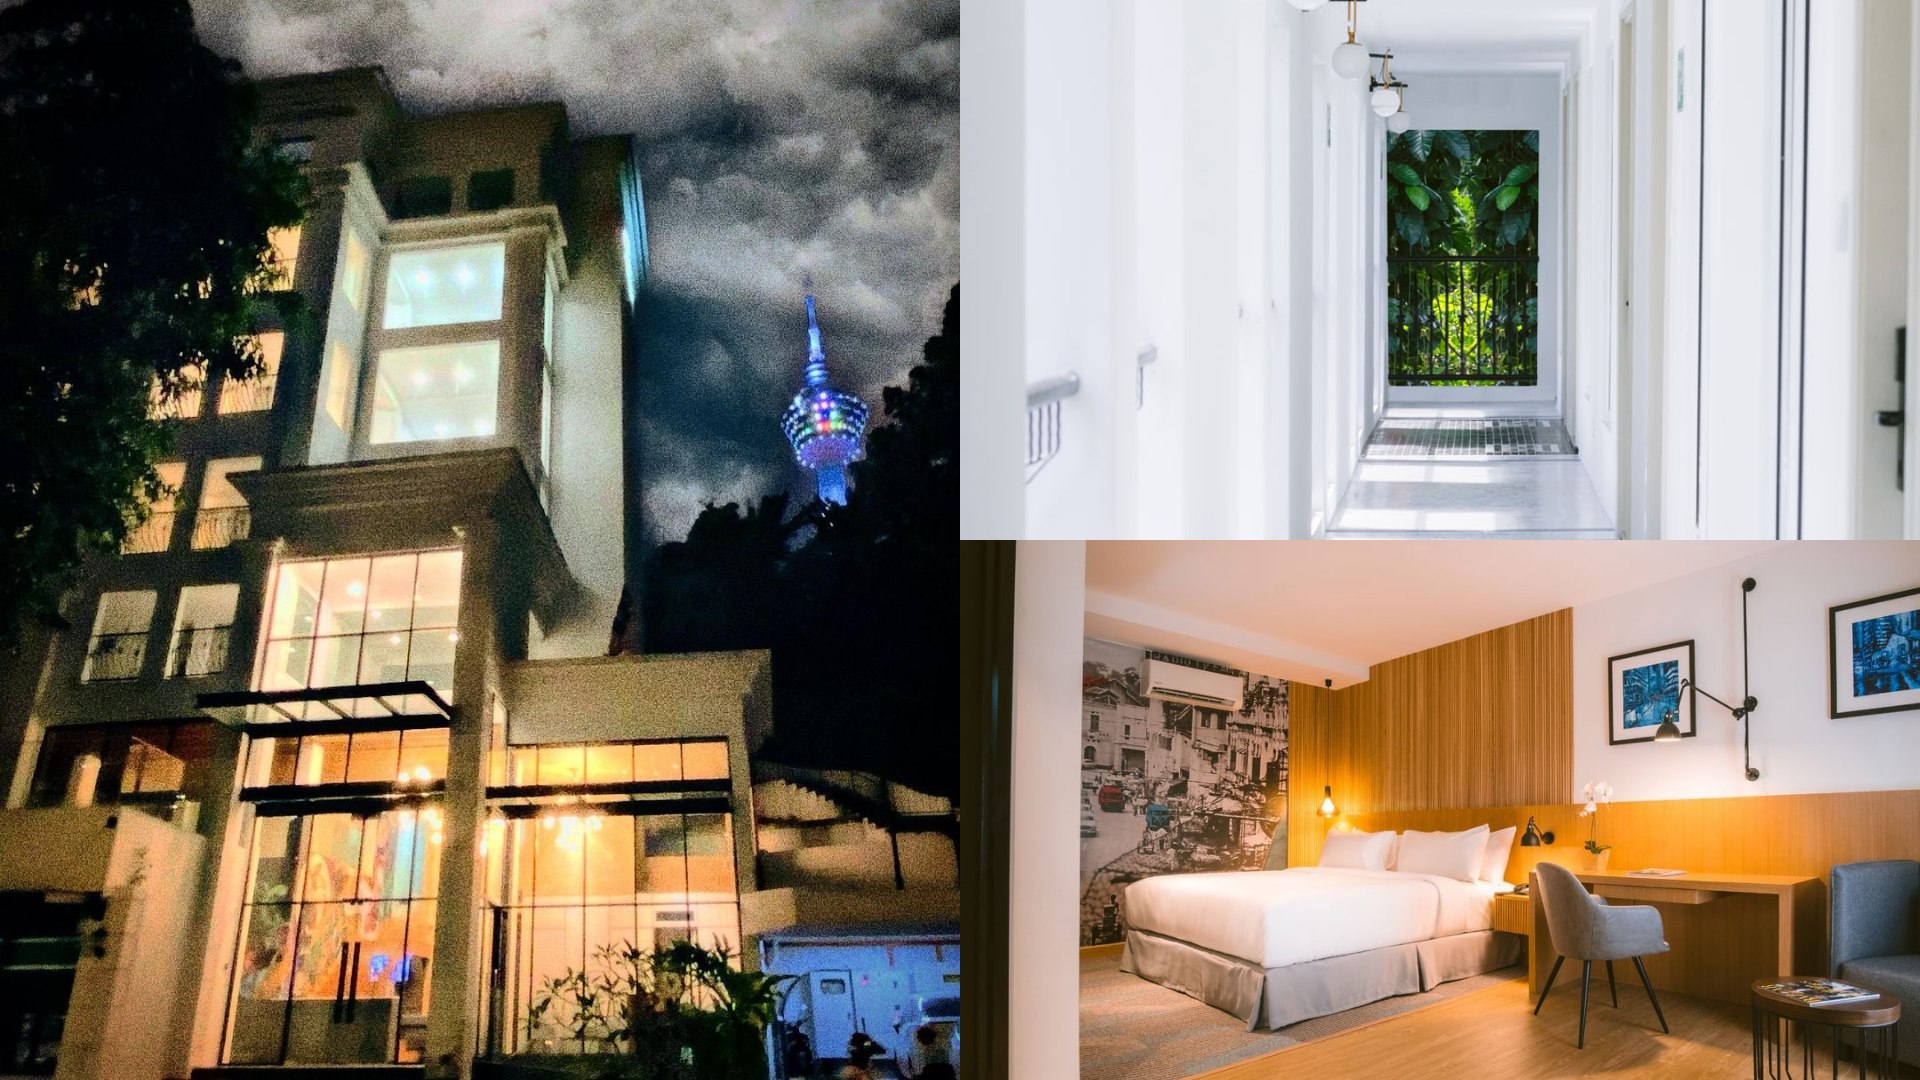 Indie Hotel KL: This Chic Boutique Hotel In Bukit Bintang Offers 